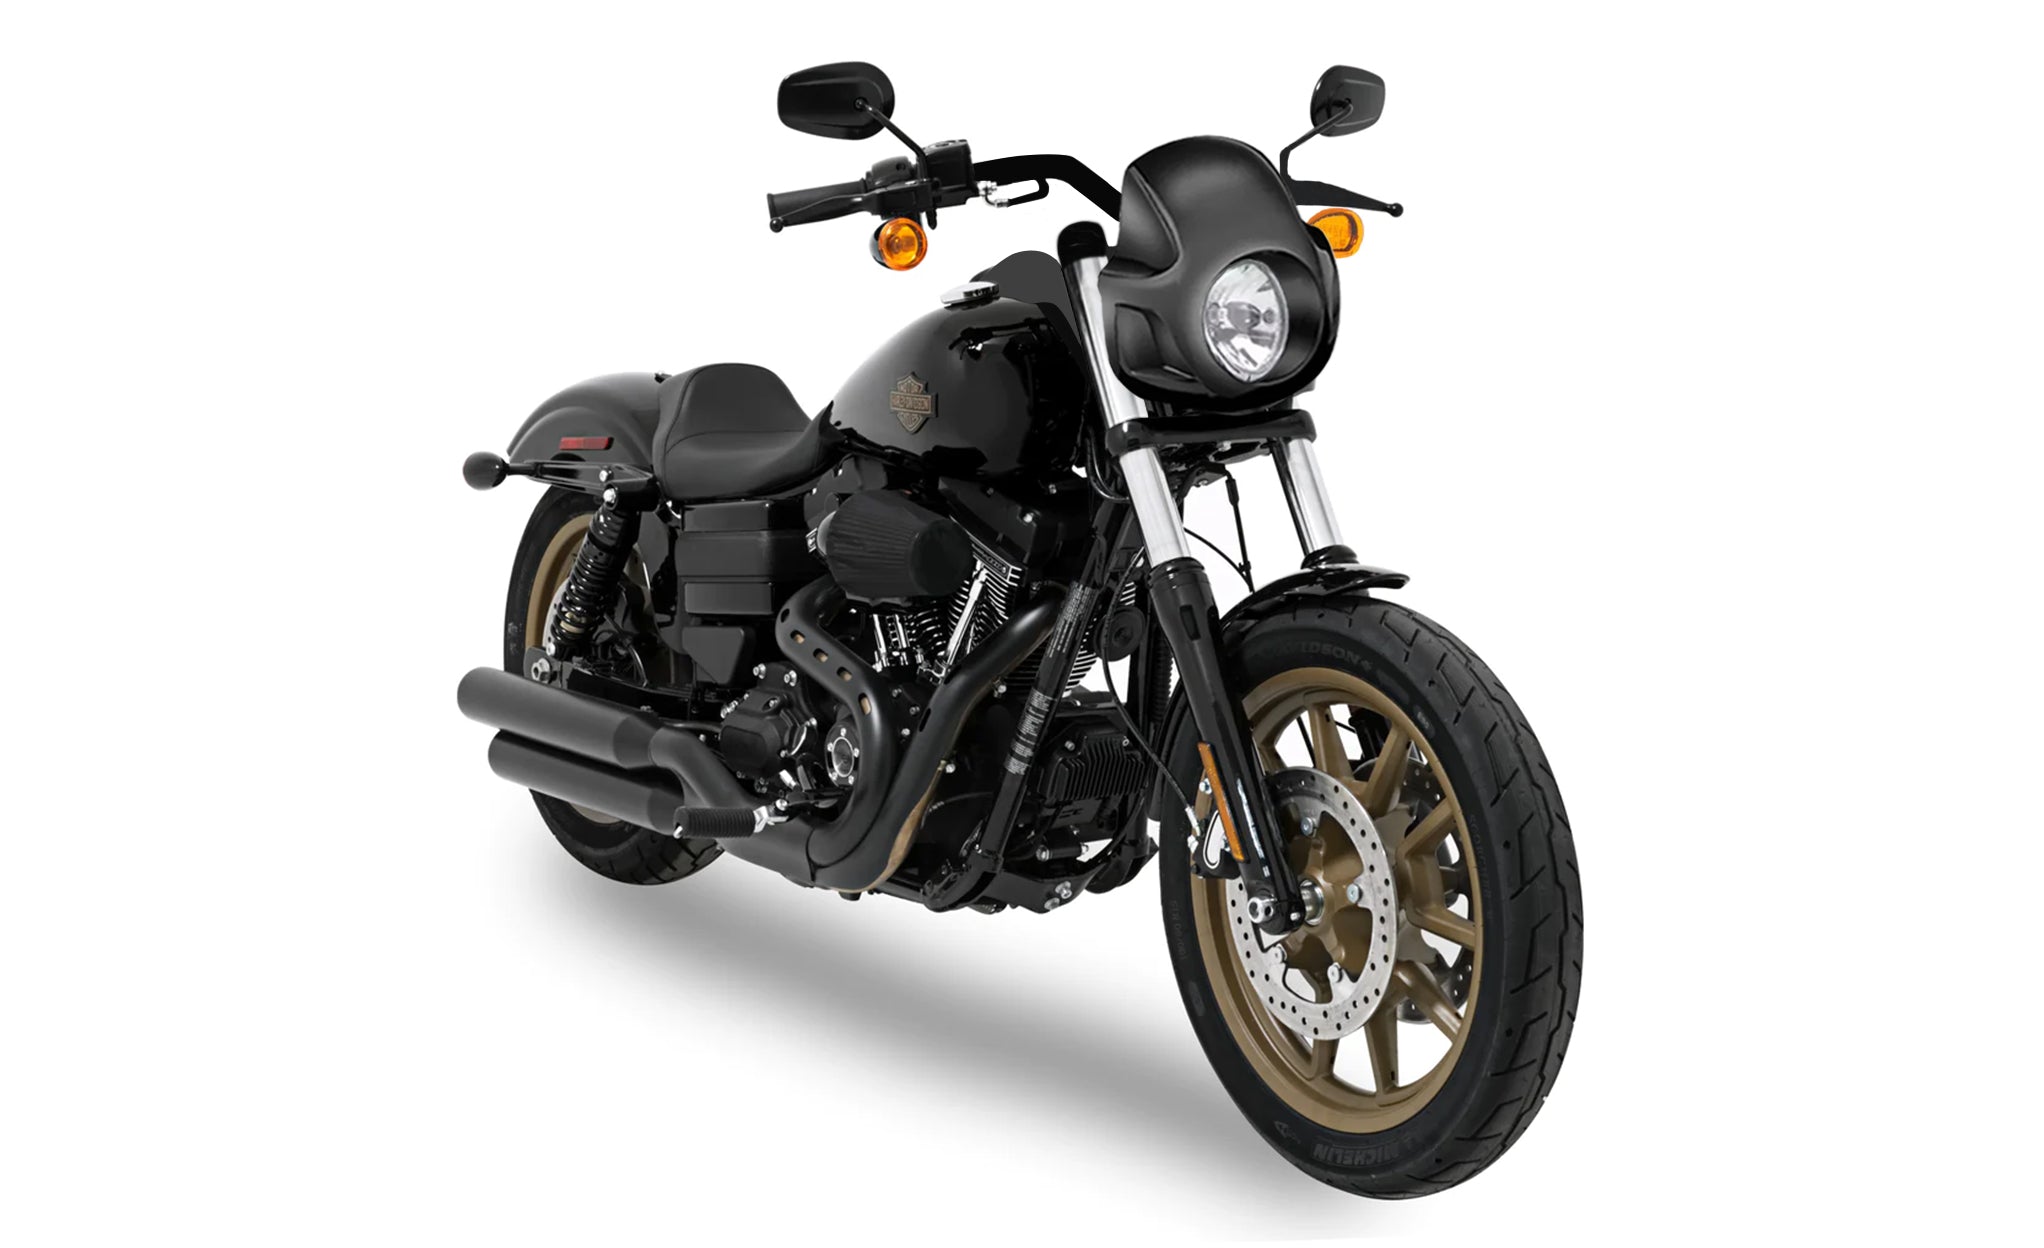 Viking Strider Sport Motorcycle Fairing For Harley Dyna Low Rider S FXDLS Gloss Black @expand